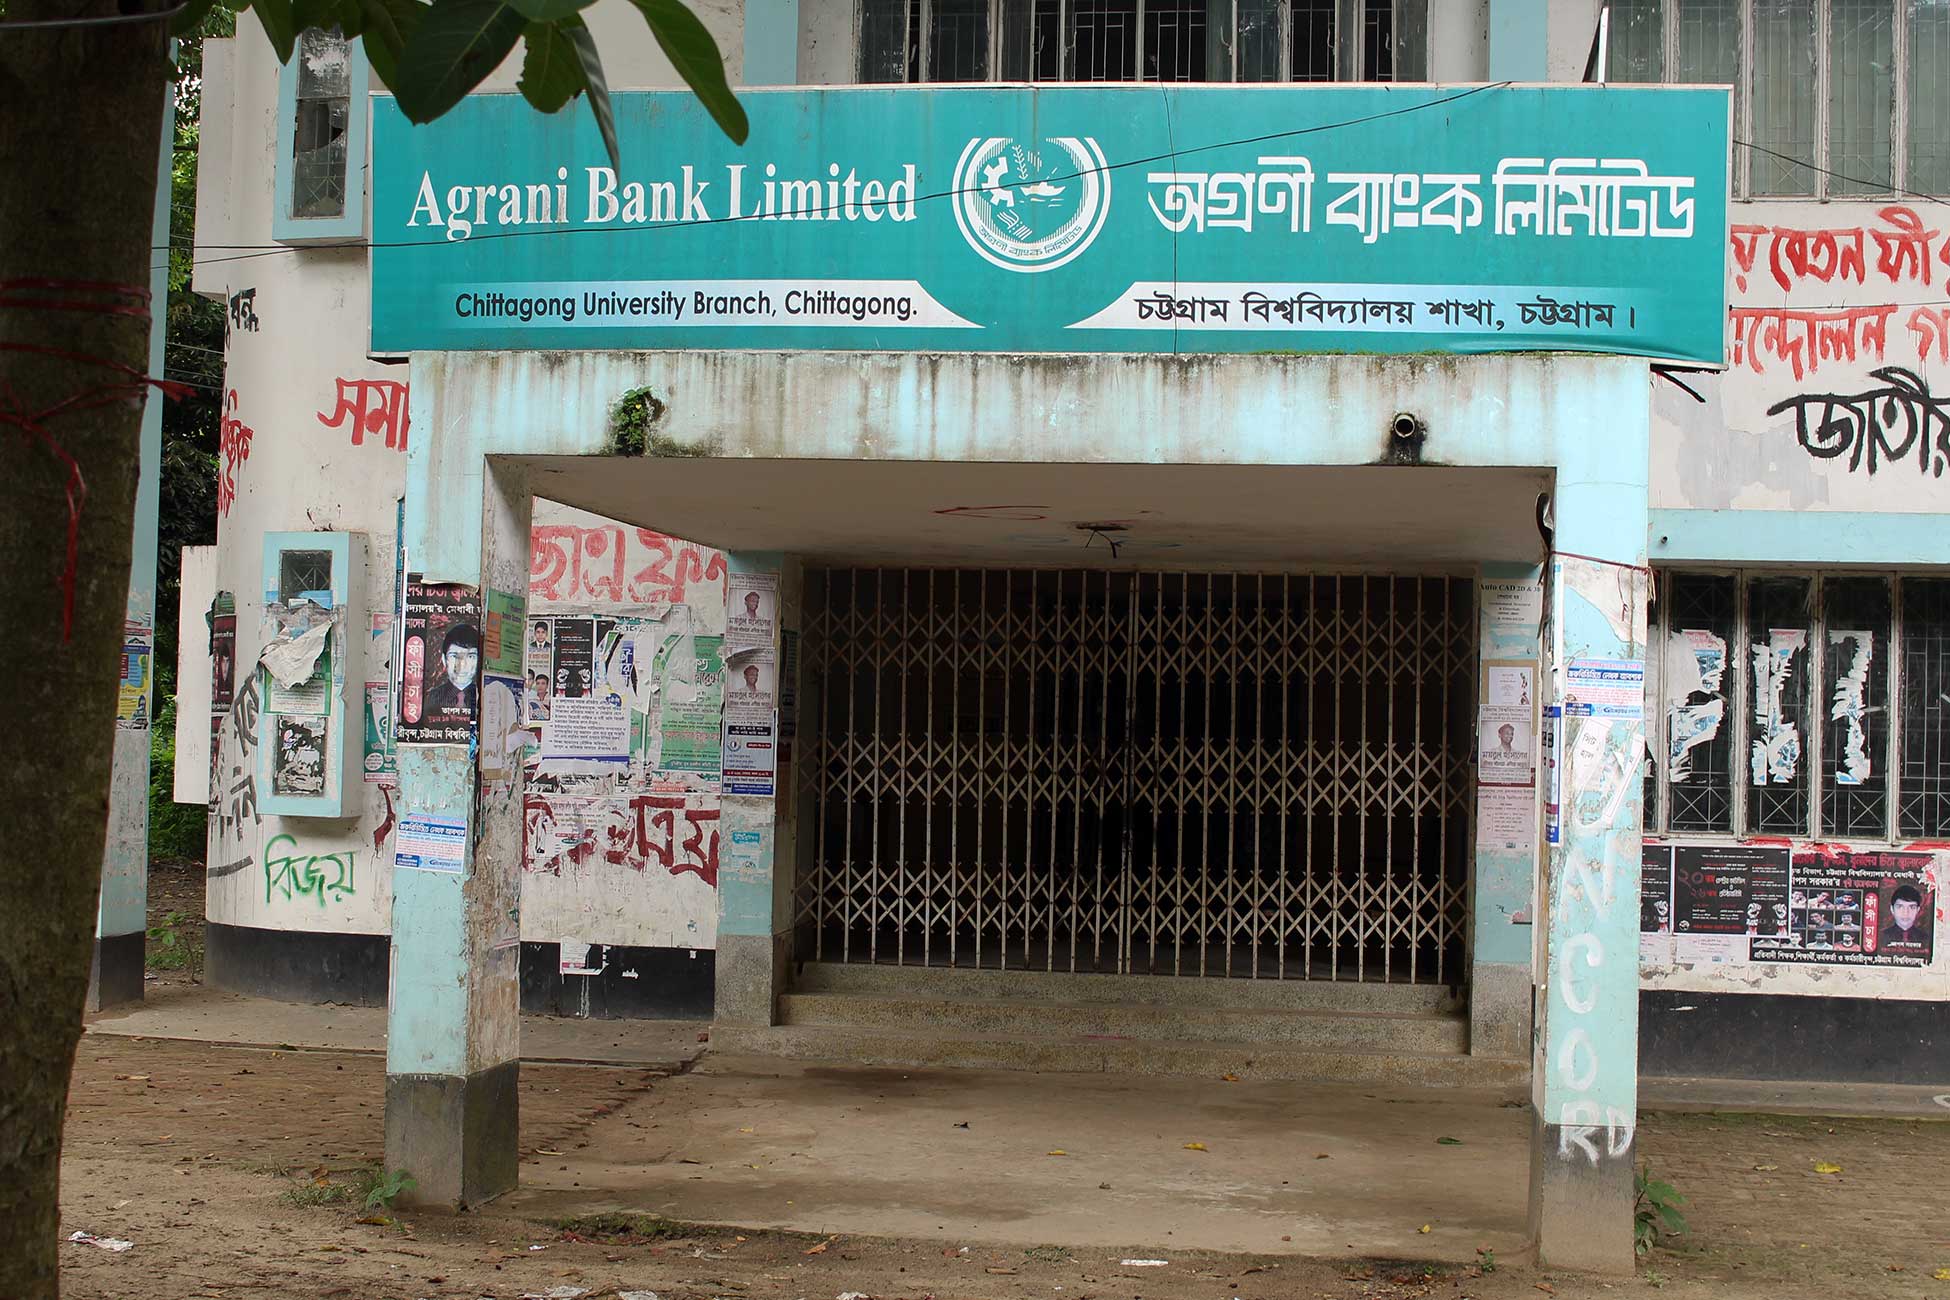 Open a bank account in Chittagong